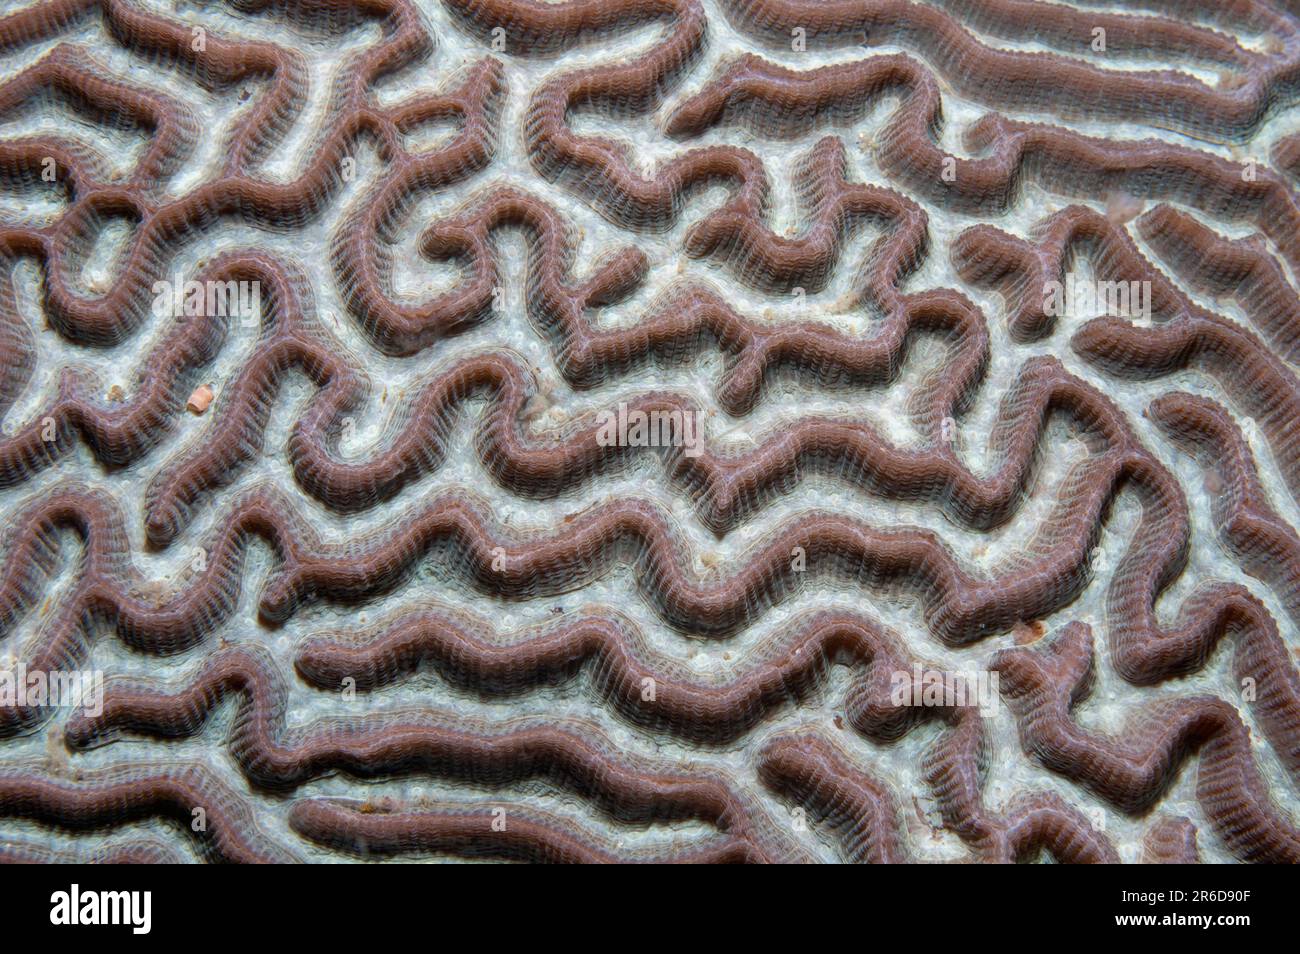 Brain Coral, Platygyra sp, Sarena West dive site, Lembeh Straits, Sulawesi, Indonesia Stock Photo